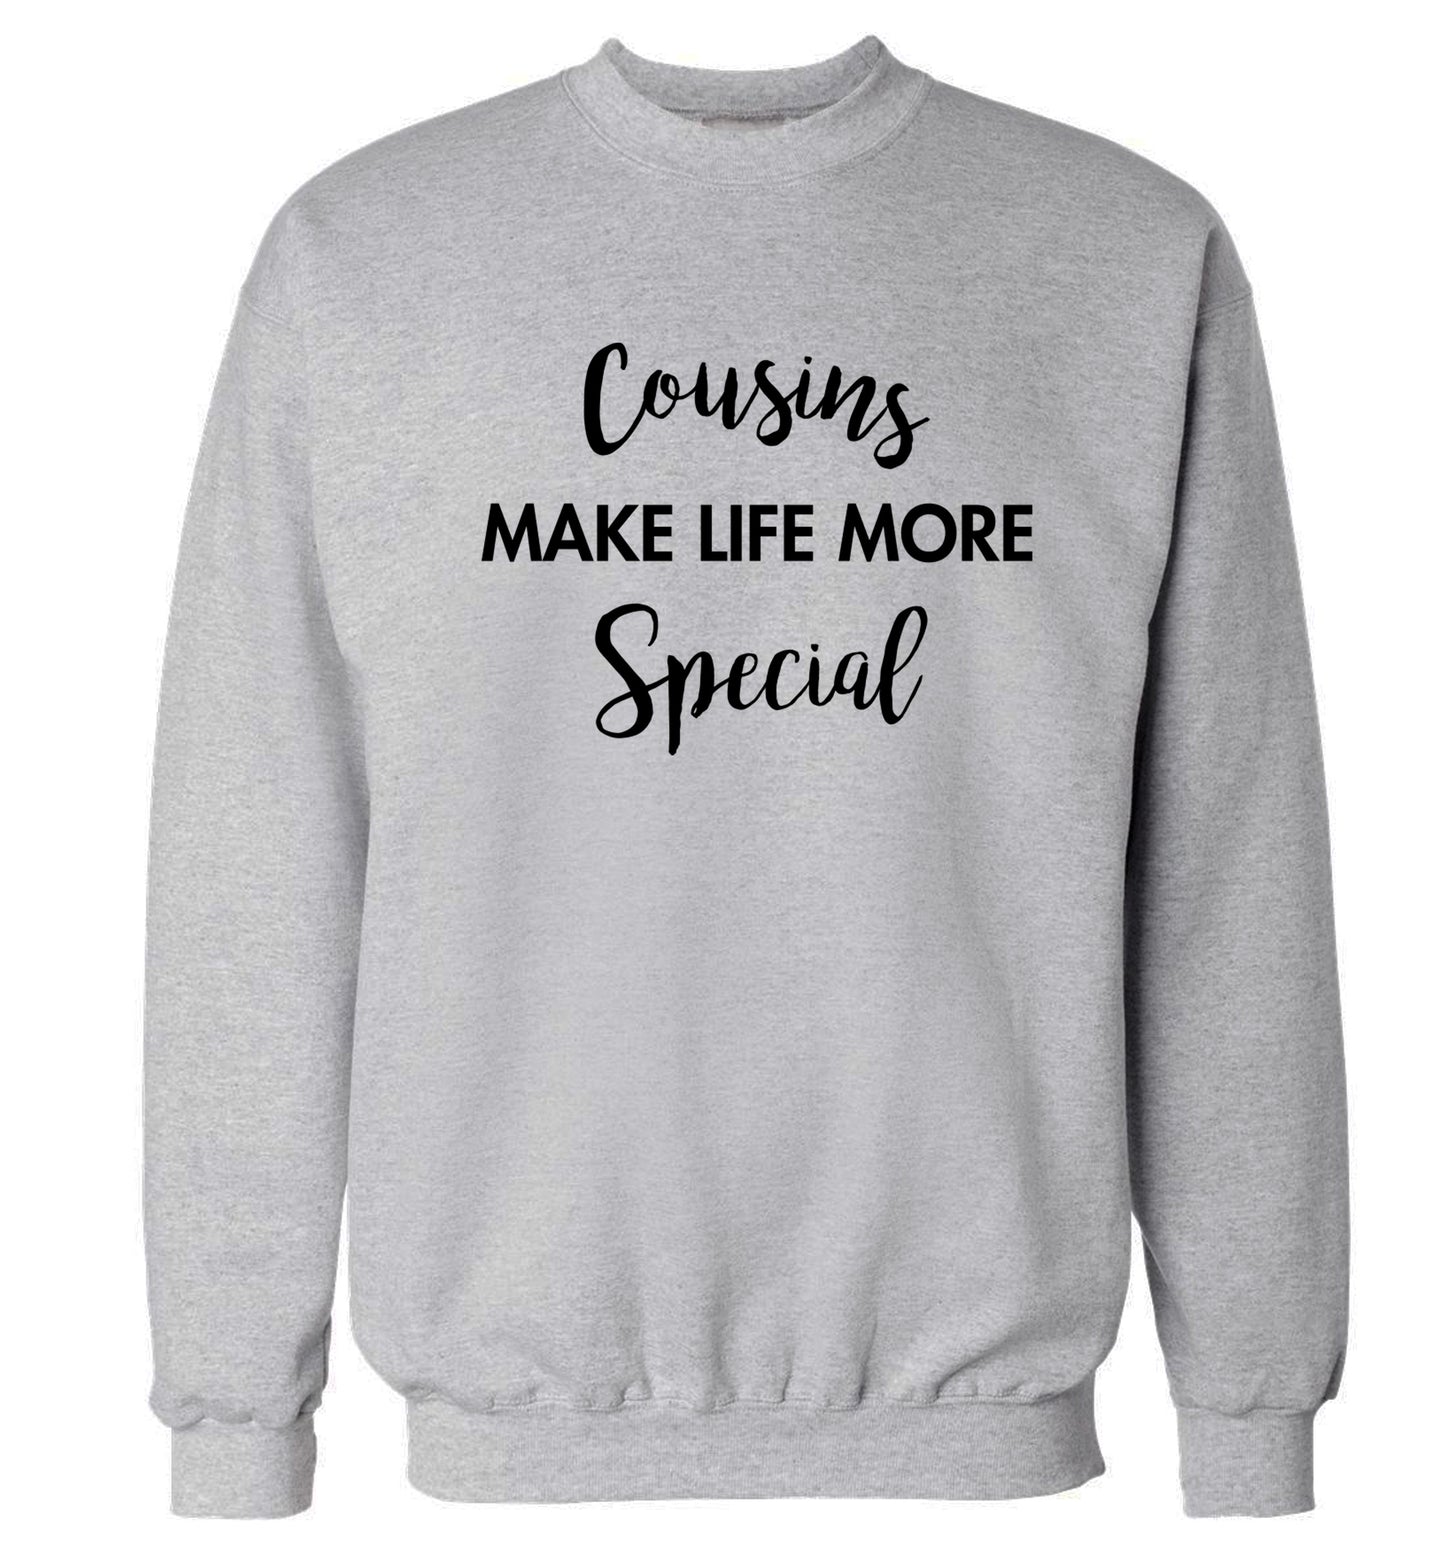 Cousins make life more special Adult's unisex grey Sweater 2XL